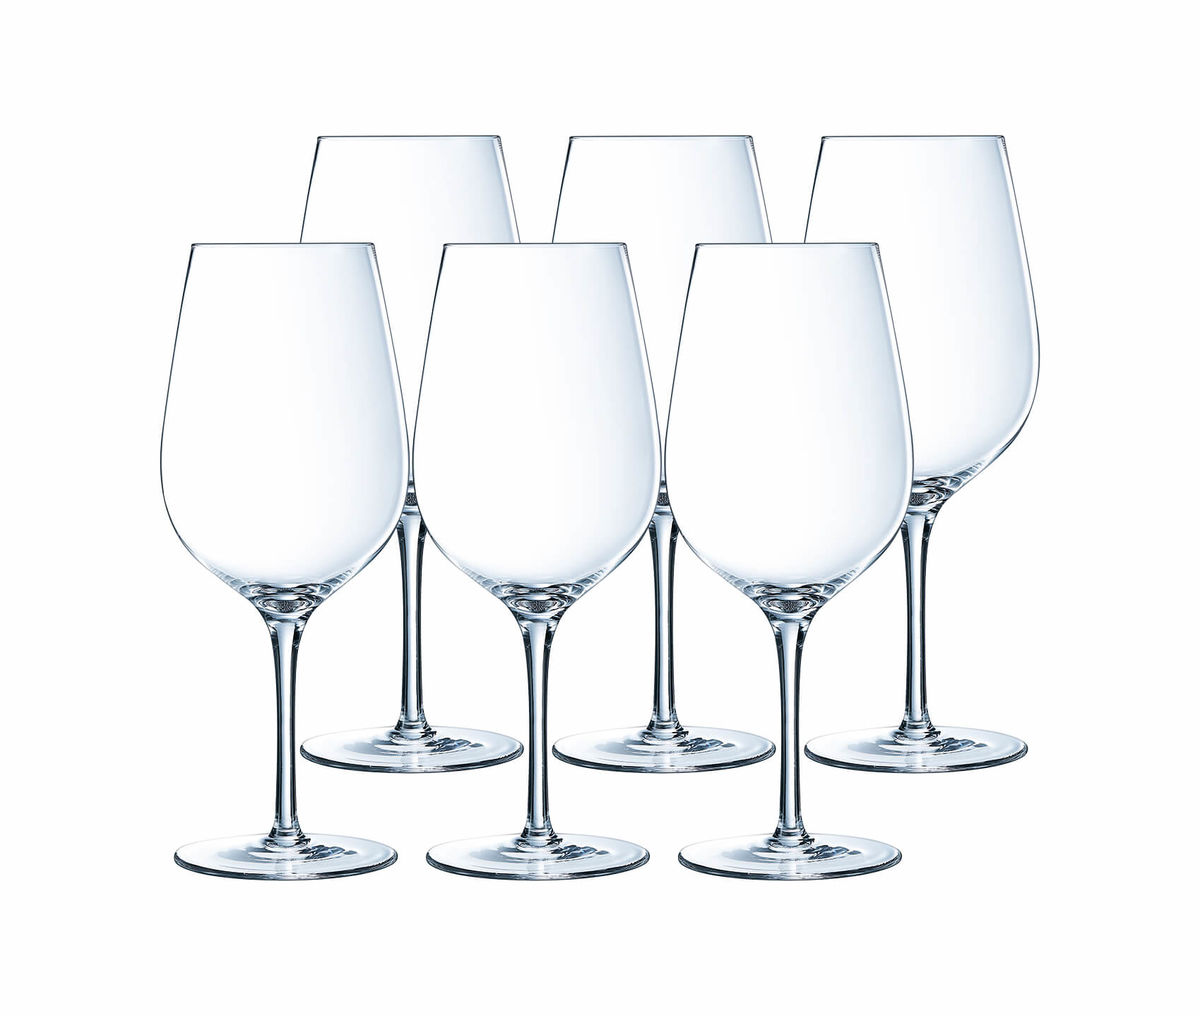 Image of Chef & Sommelier Sequence Weinglas 6 x 62 cl bei nettoshop.ch